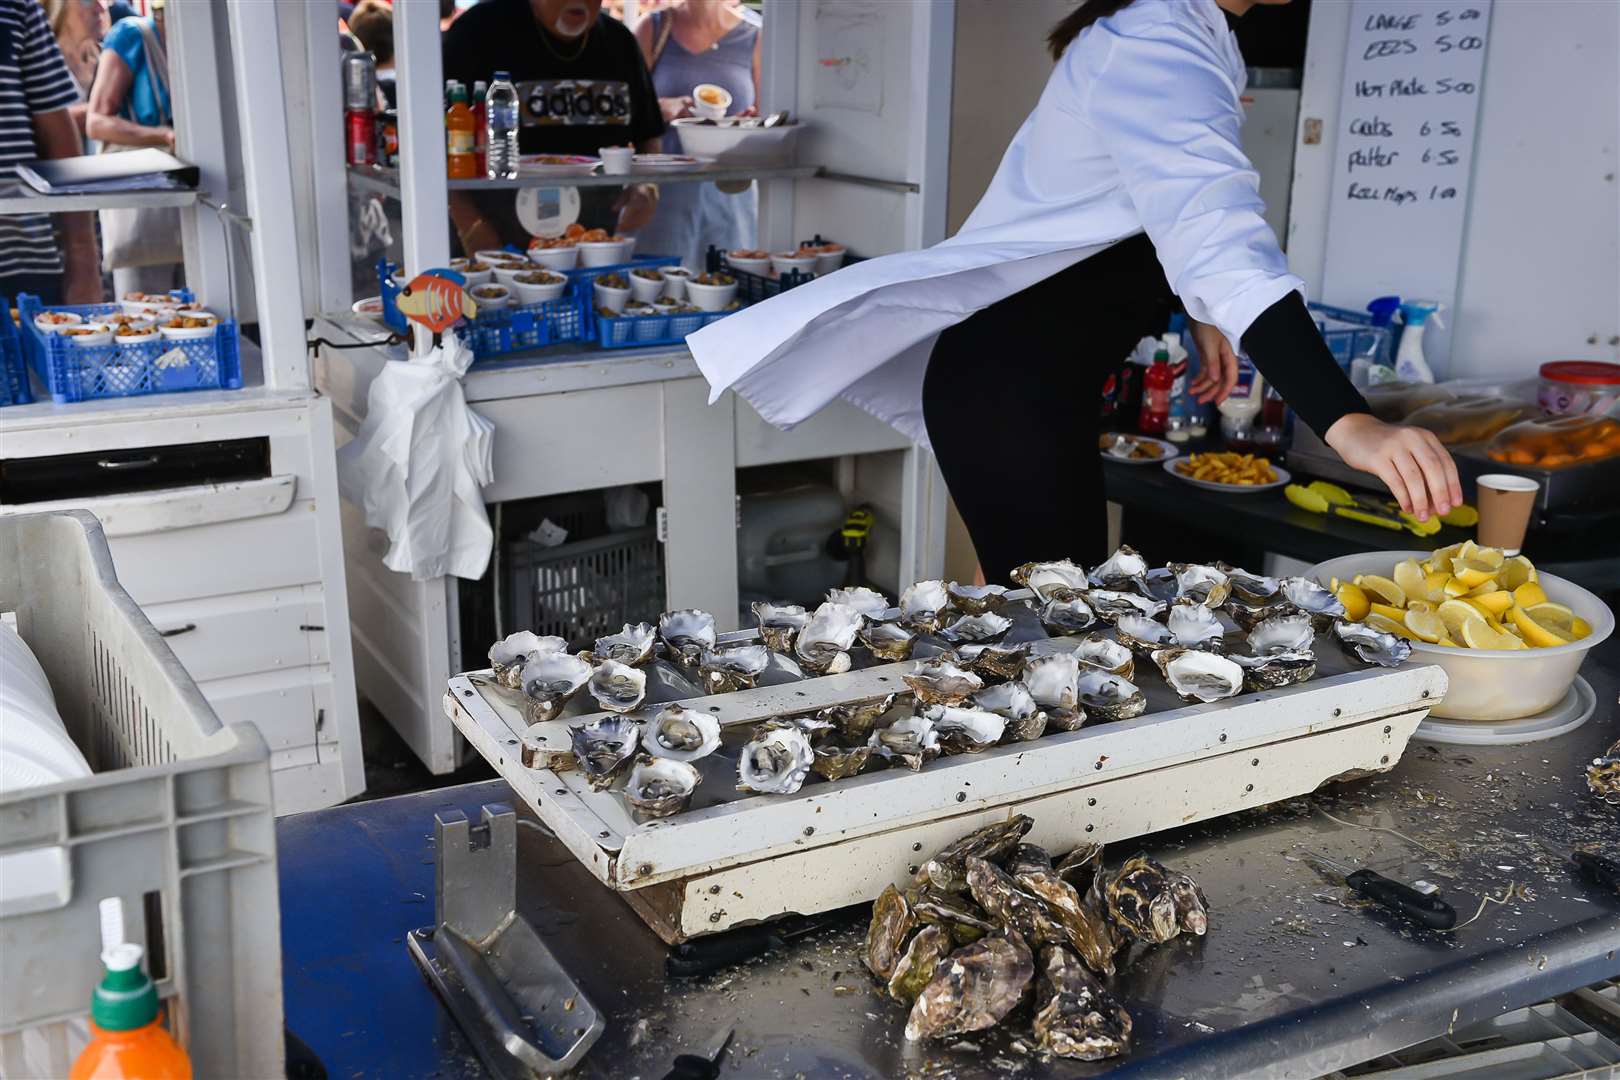 The inquiry could impact events, such as the Whitstable Oyster Festival, the WOFC have claimed. Picture: Alan Langley